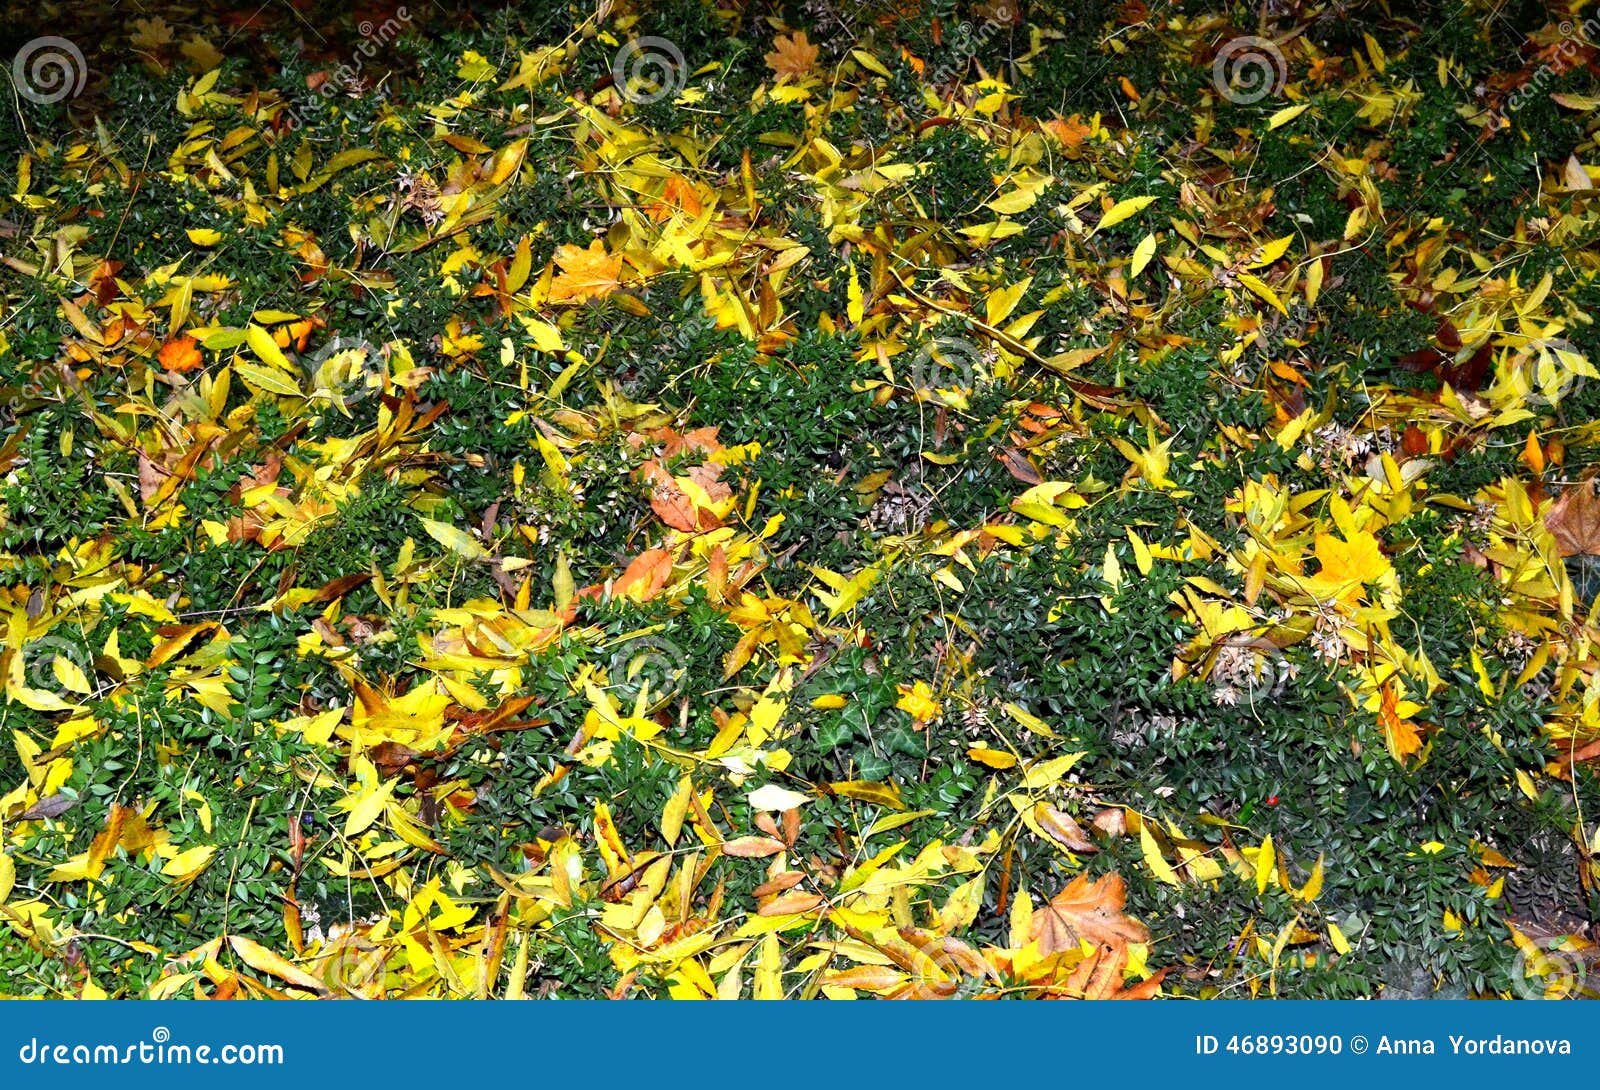 Green yellow leaf carpet stock photo. Image of leaves - 46893090